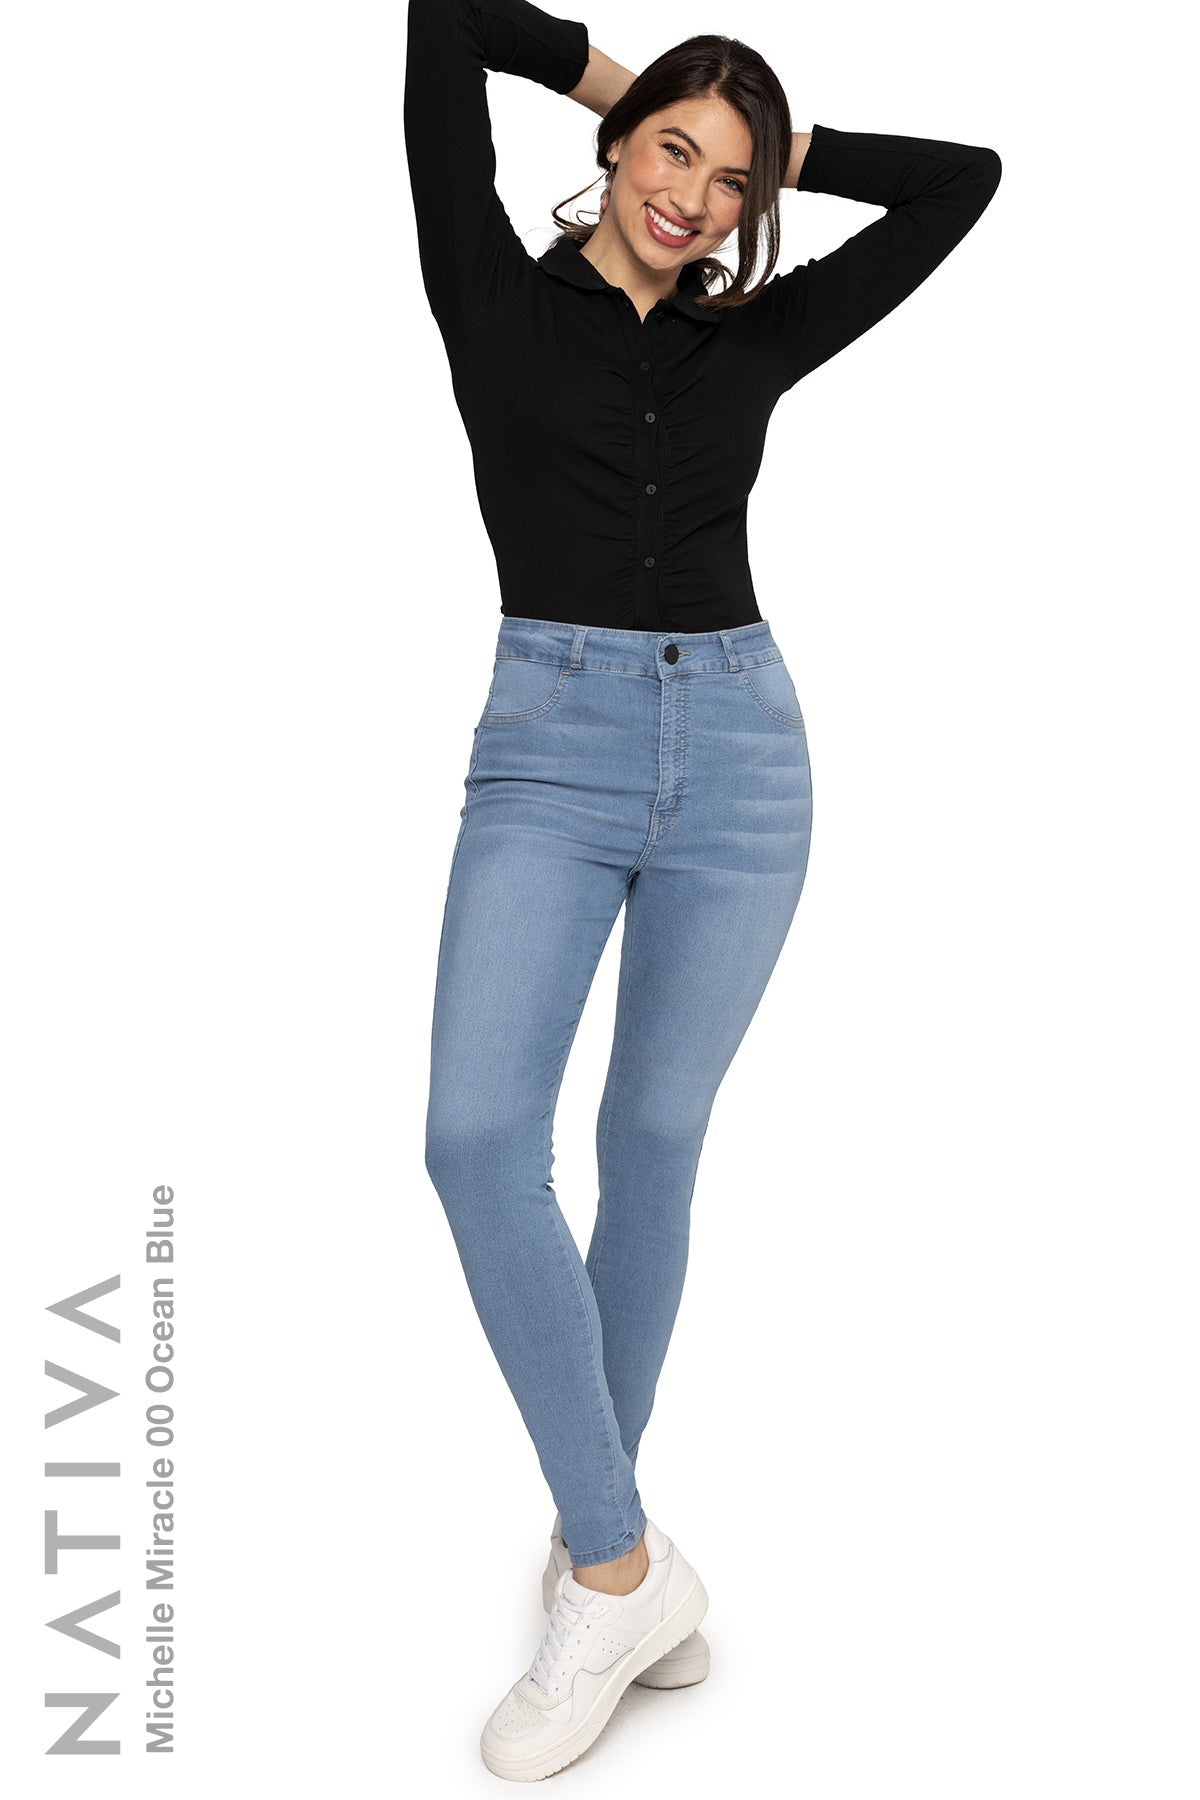 NATIVA, STRETCH JEANS. MICHELLE MIRACLE 00 OCEAN BLUE, High Shaping Ca